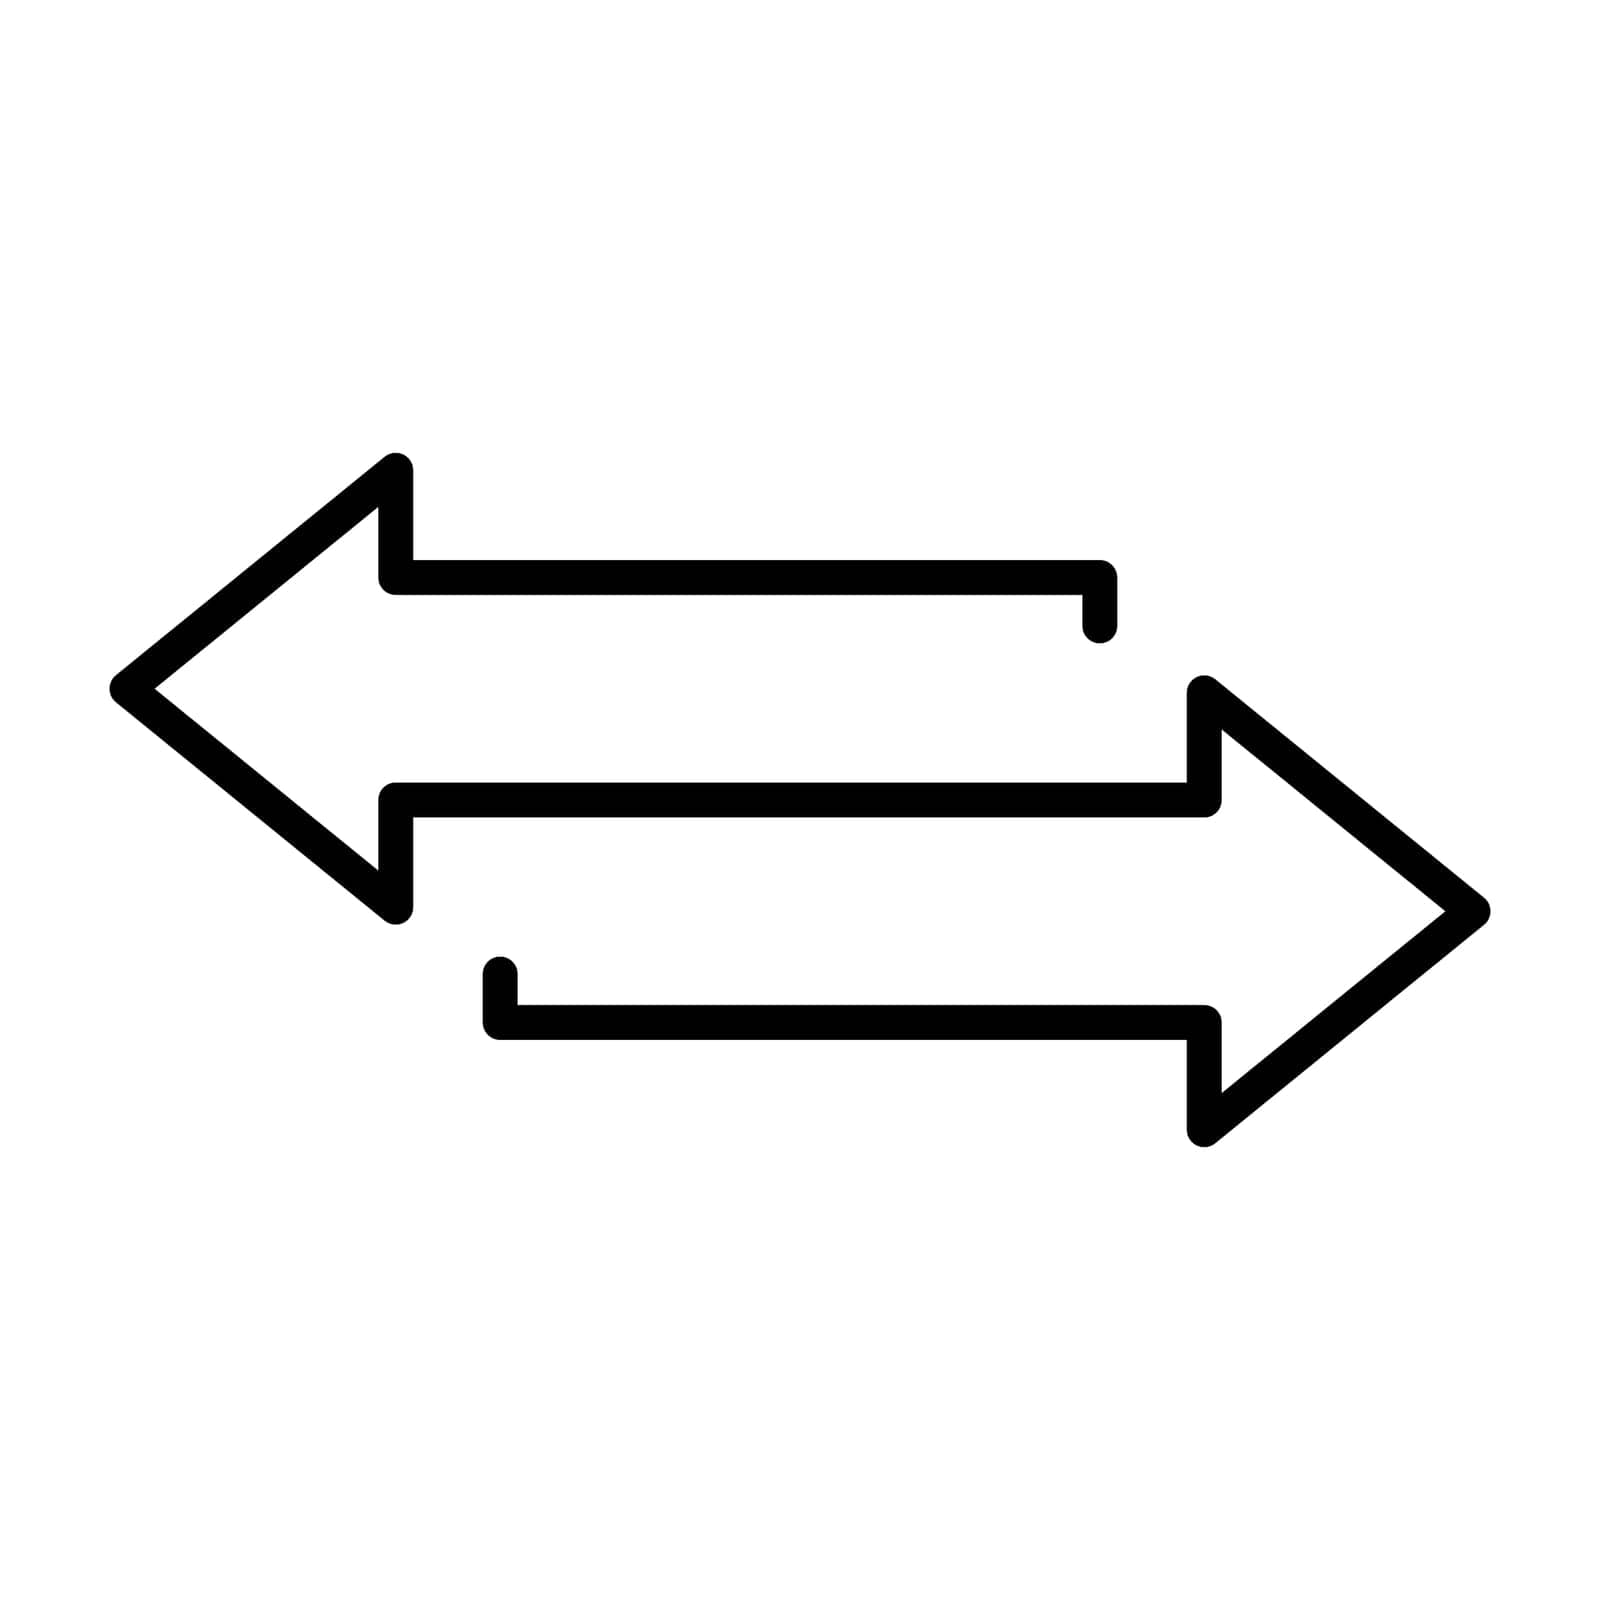 Right and left linear arrows. Vector arrows by Chekman